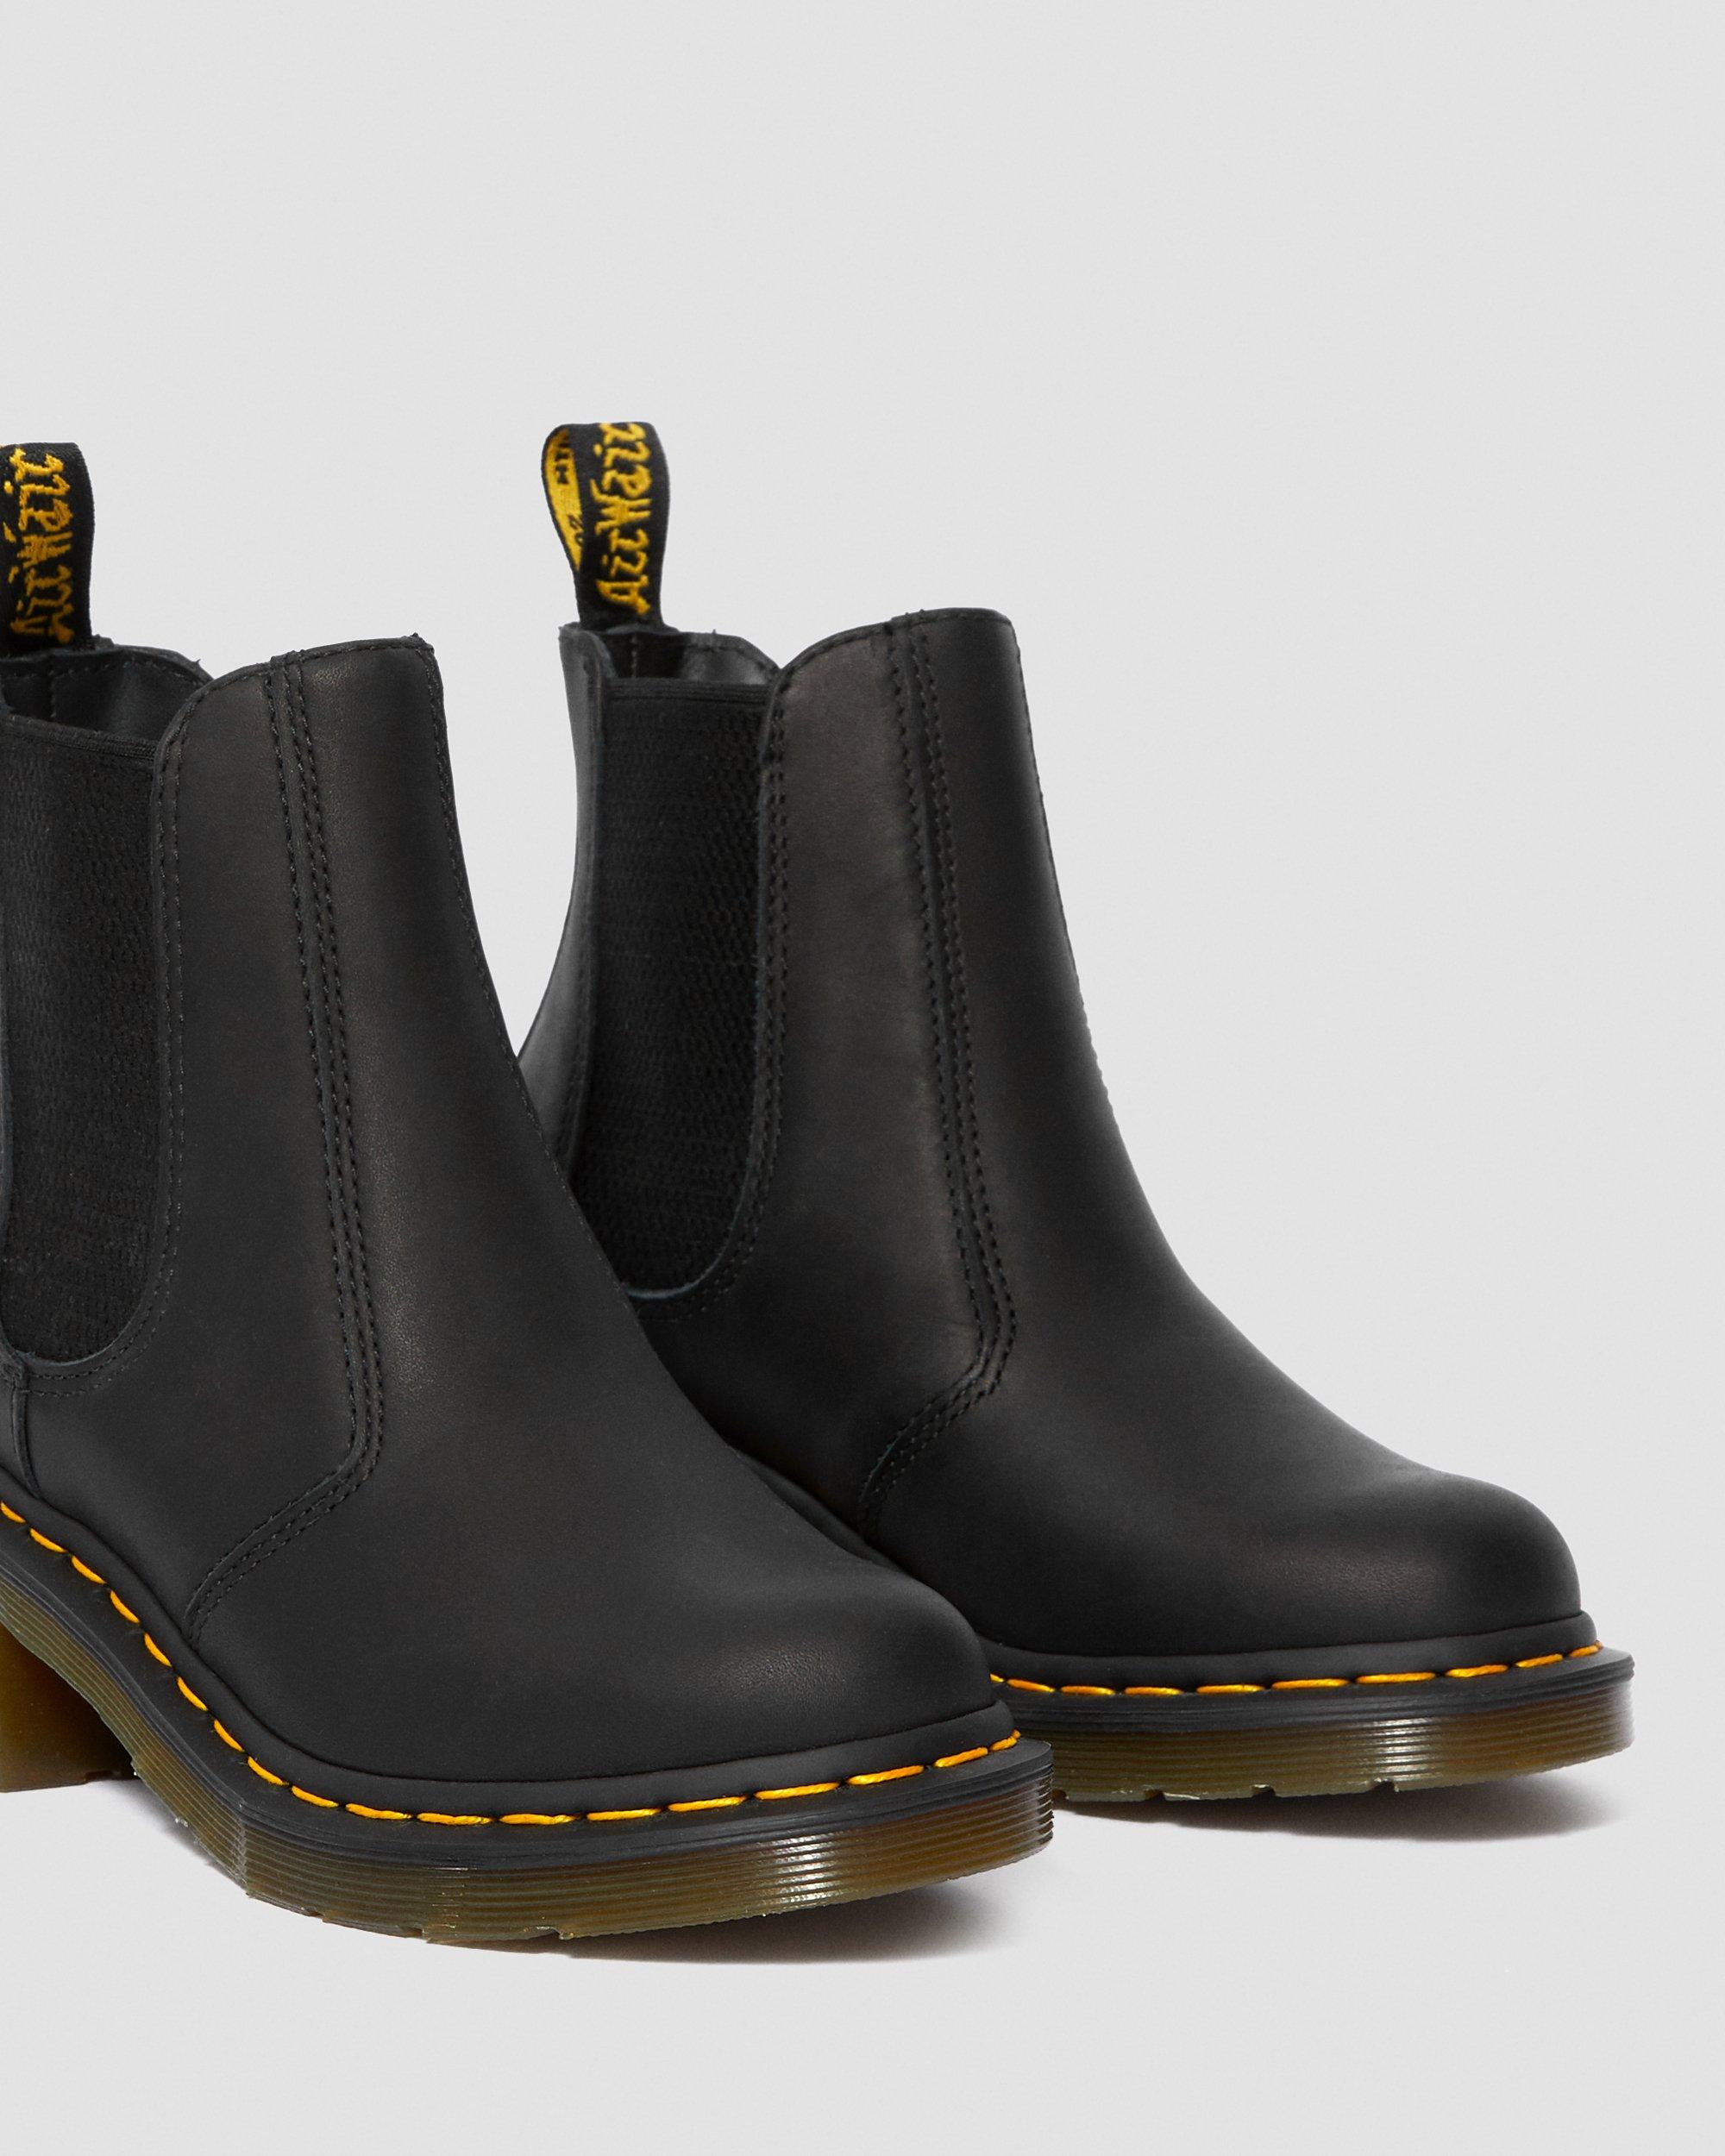 Cadence Greasy Heeled Chelsea Boots Dr. Martens